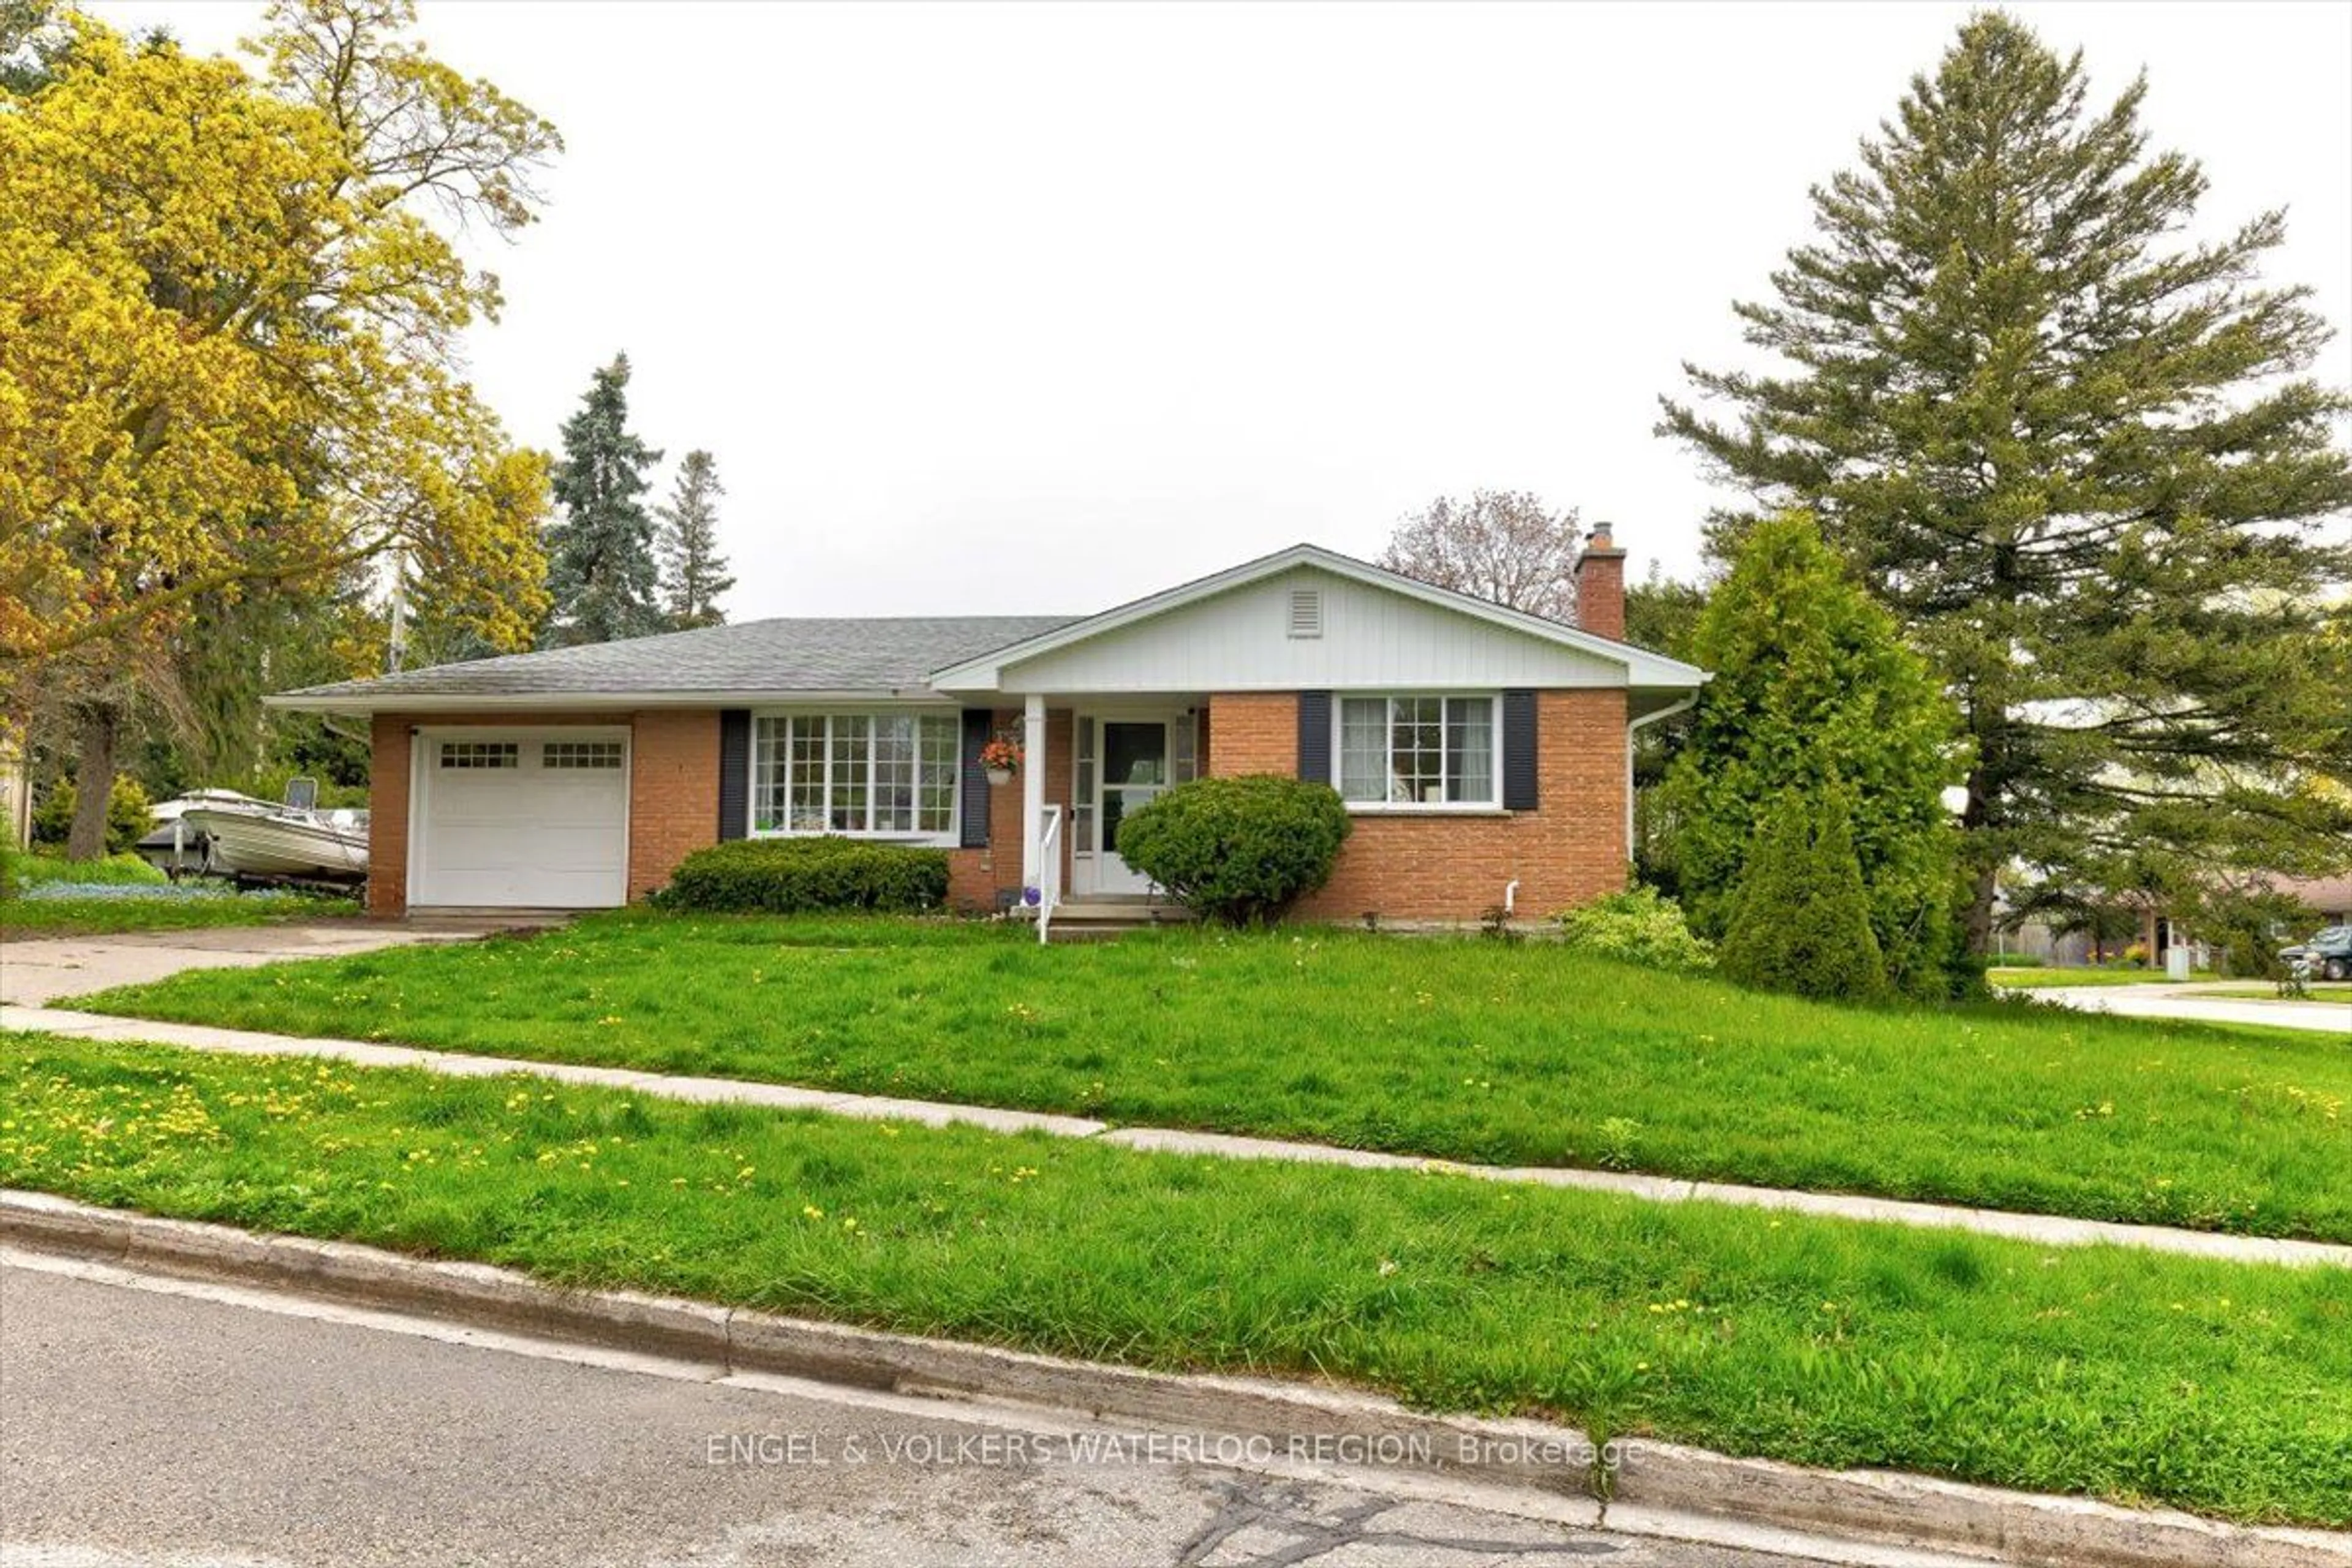 Home with brick exterior material for 32 Grant St, Cambridge Ontario N1S 1C1